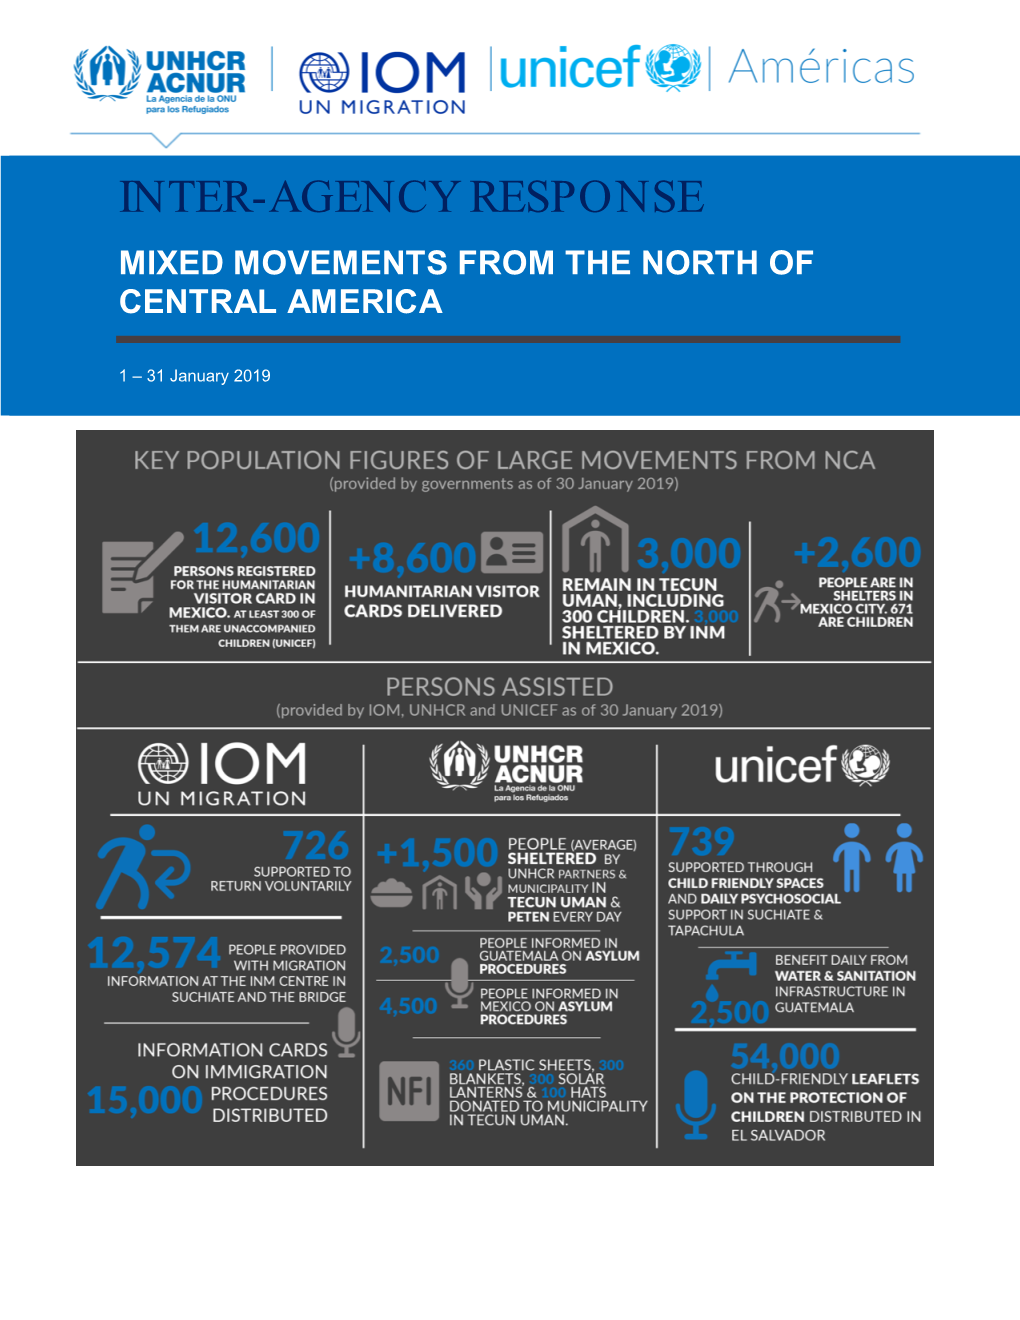 Inter-Agency Response Mixed Movements from the North of Central America